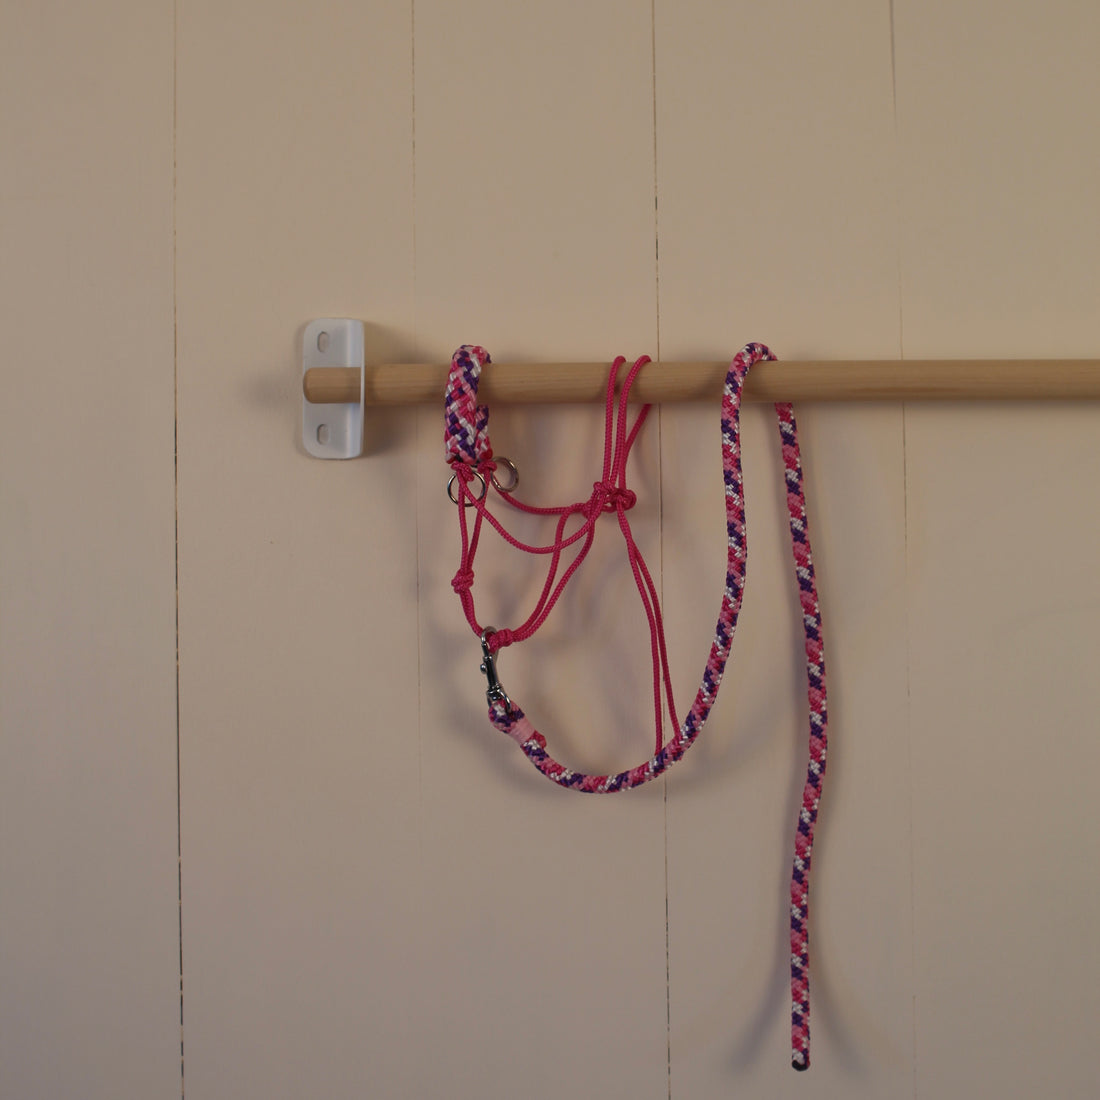 Halter with rope pink / purple / white